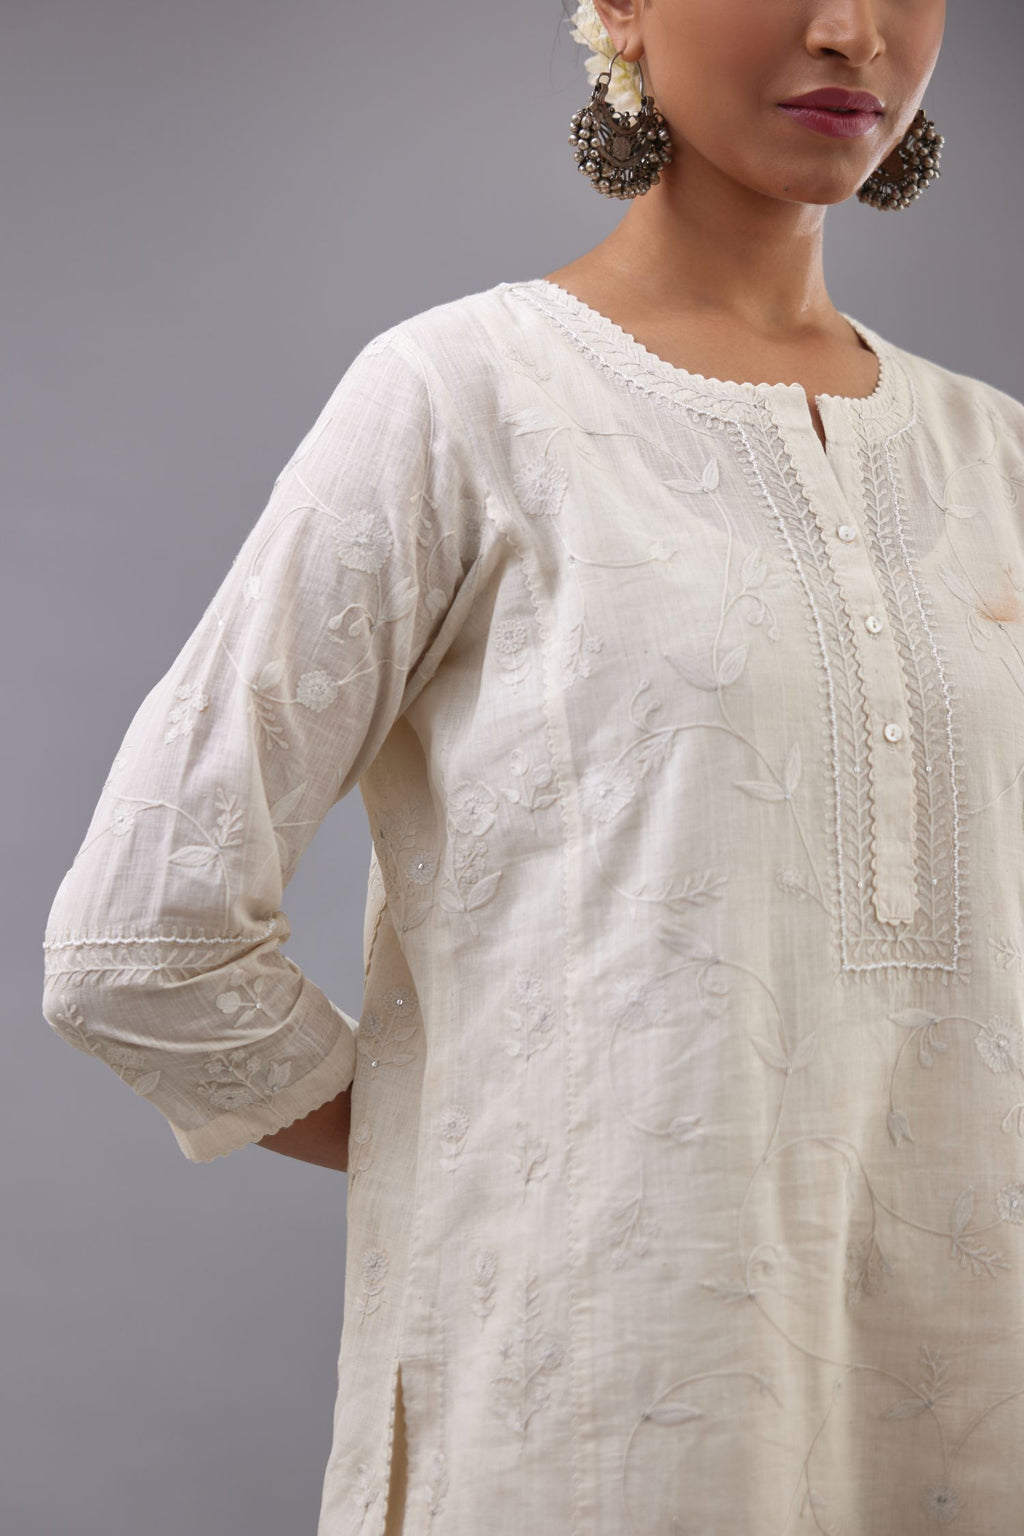 Off-white Handspun handwoven cotton kurta set with all-over jaal embroidery and small assorted flowers embroidery at side panells, highlighted with sequins handwork.